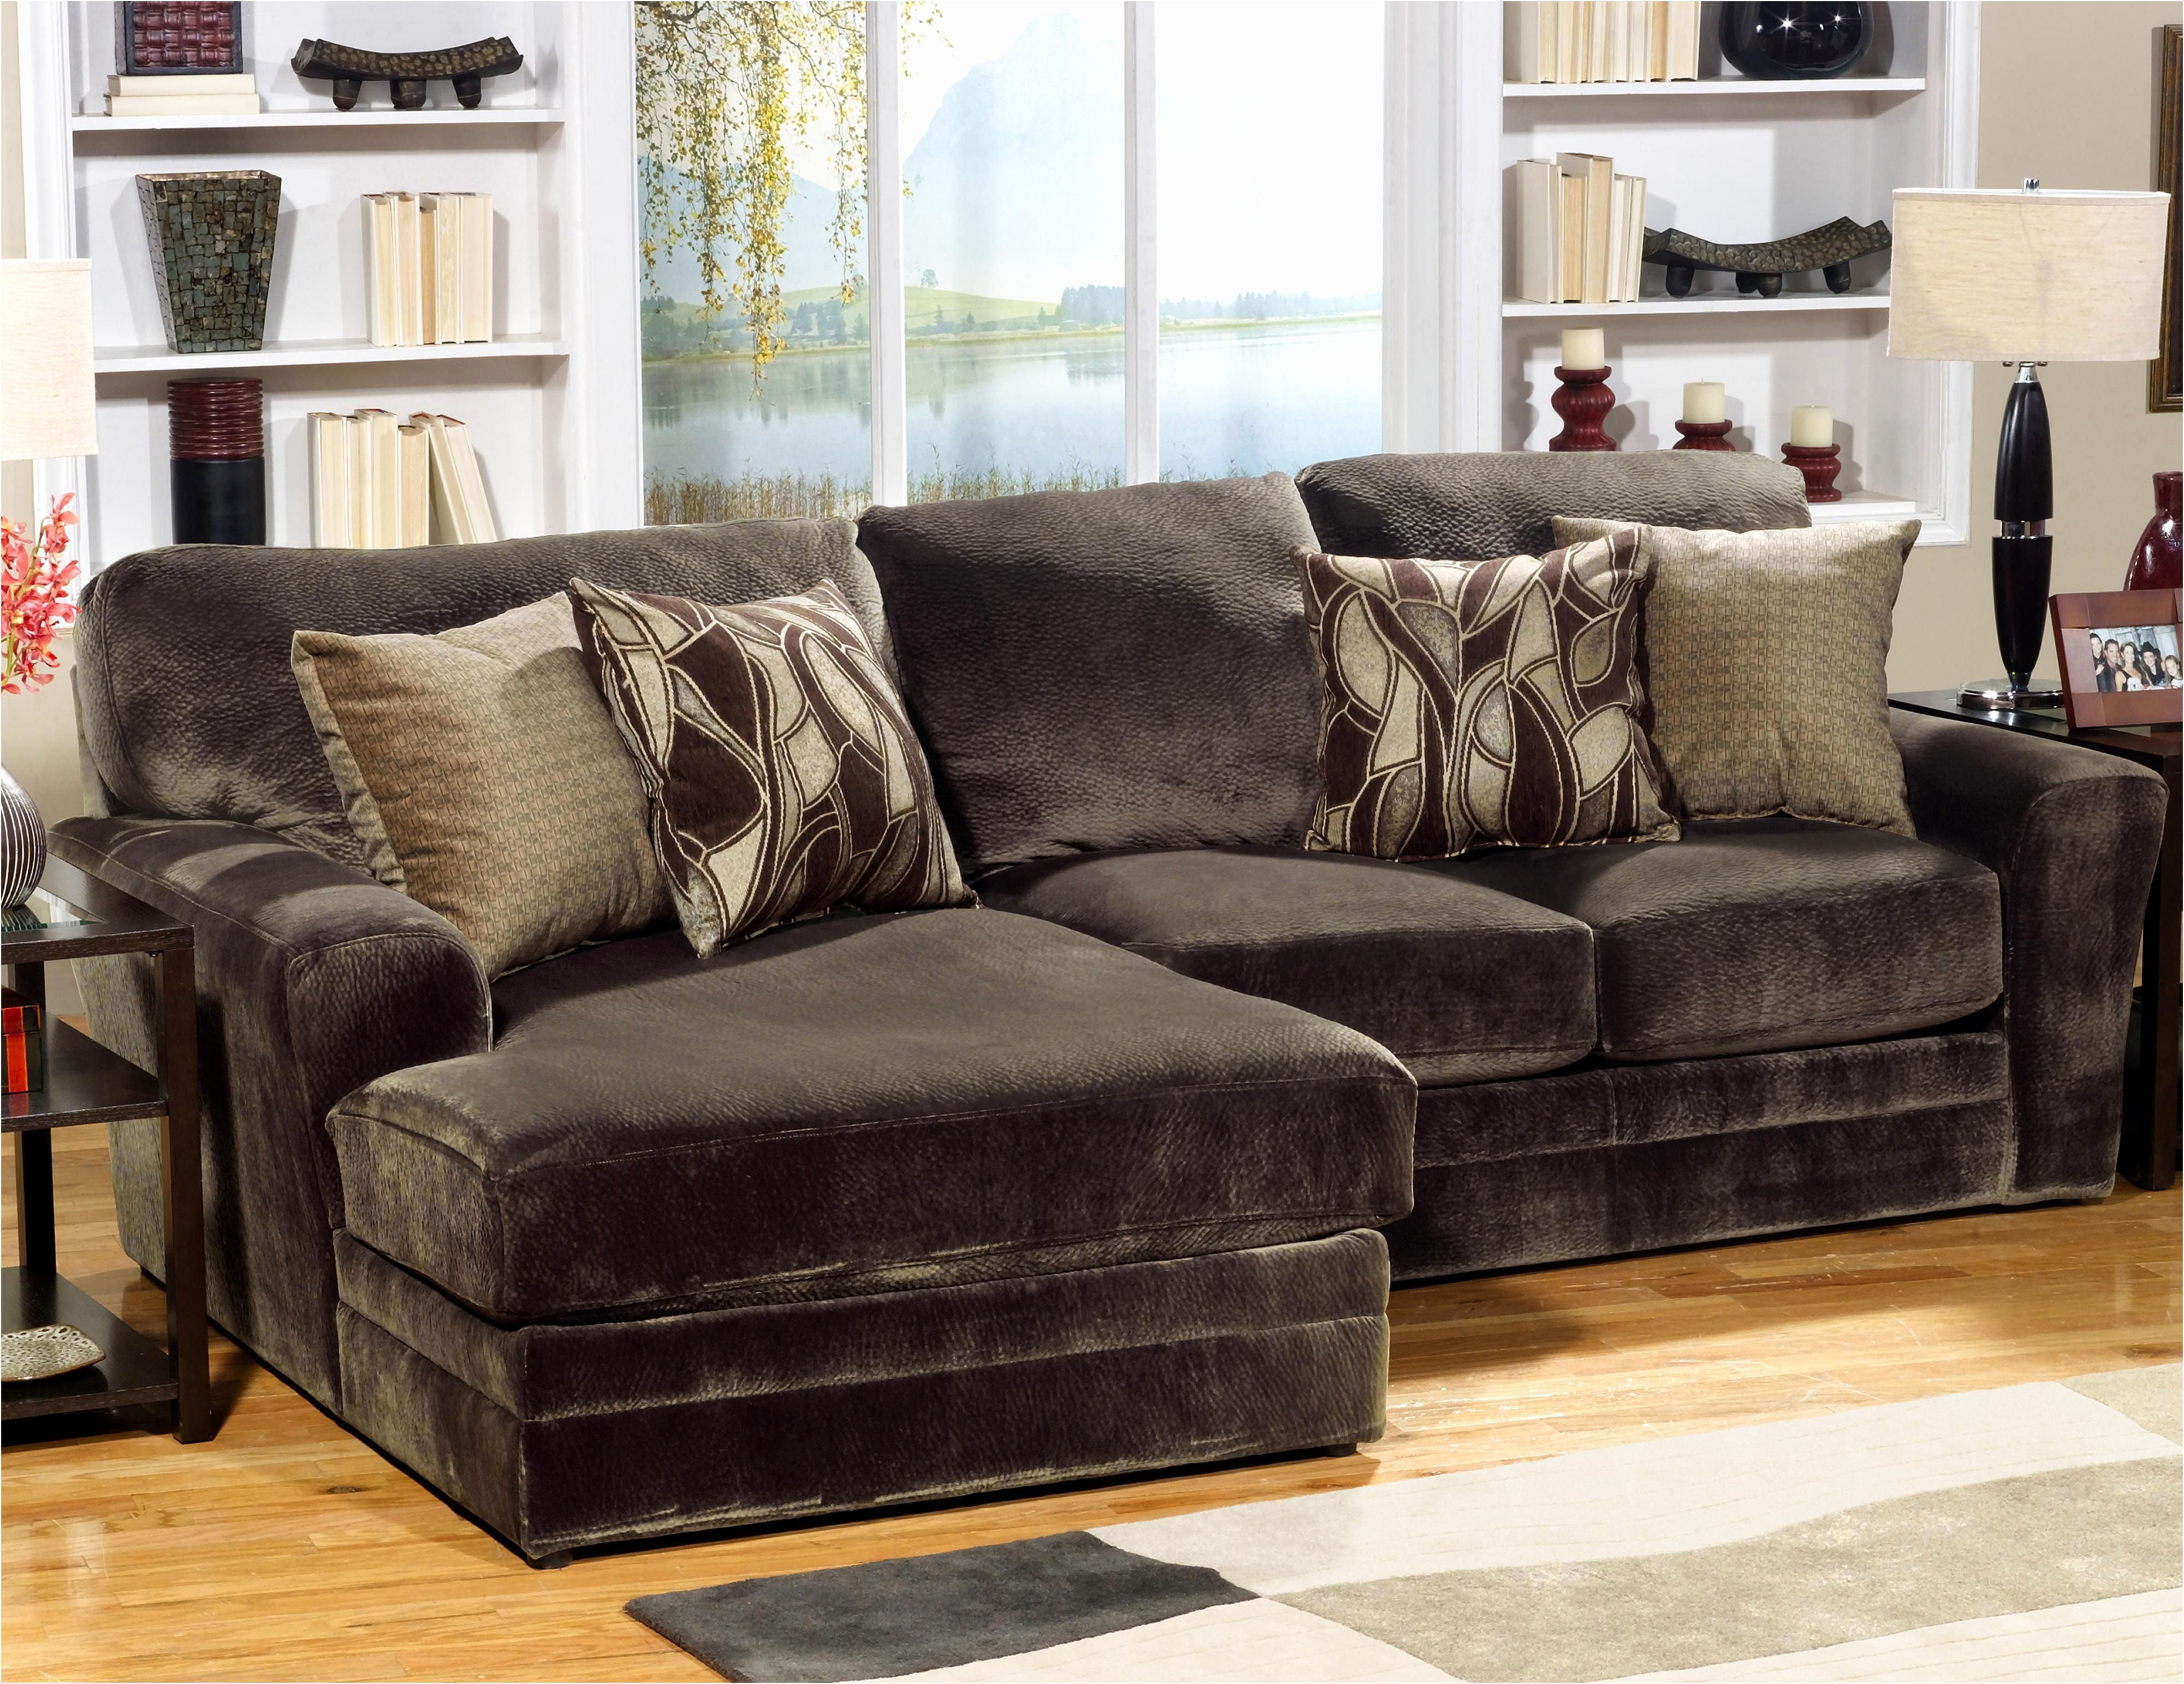 2019 Evan Piece Sectional Sofa Set Centerfieldbar Two Frontenac Regarding Evan 2 Piece Sectionals With Raf Chaise (View 5 of 20)